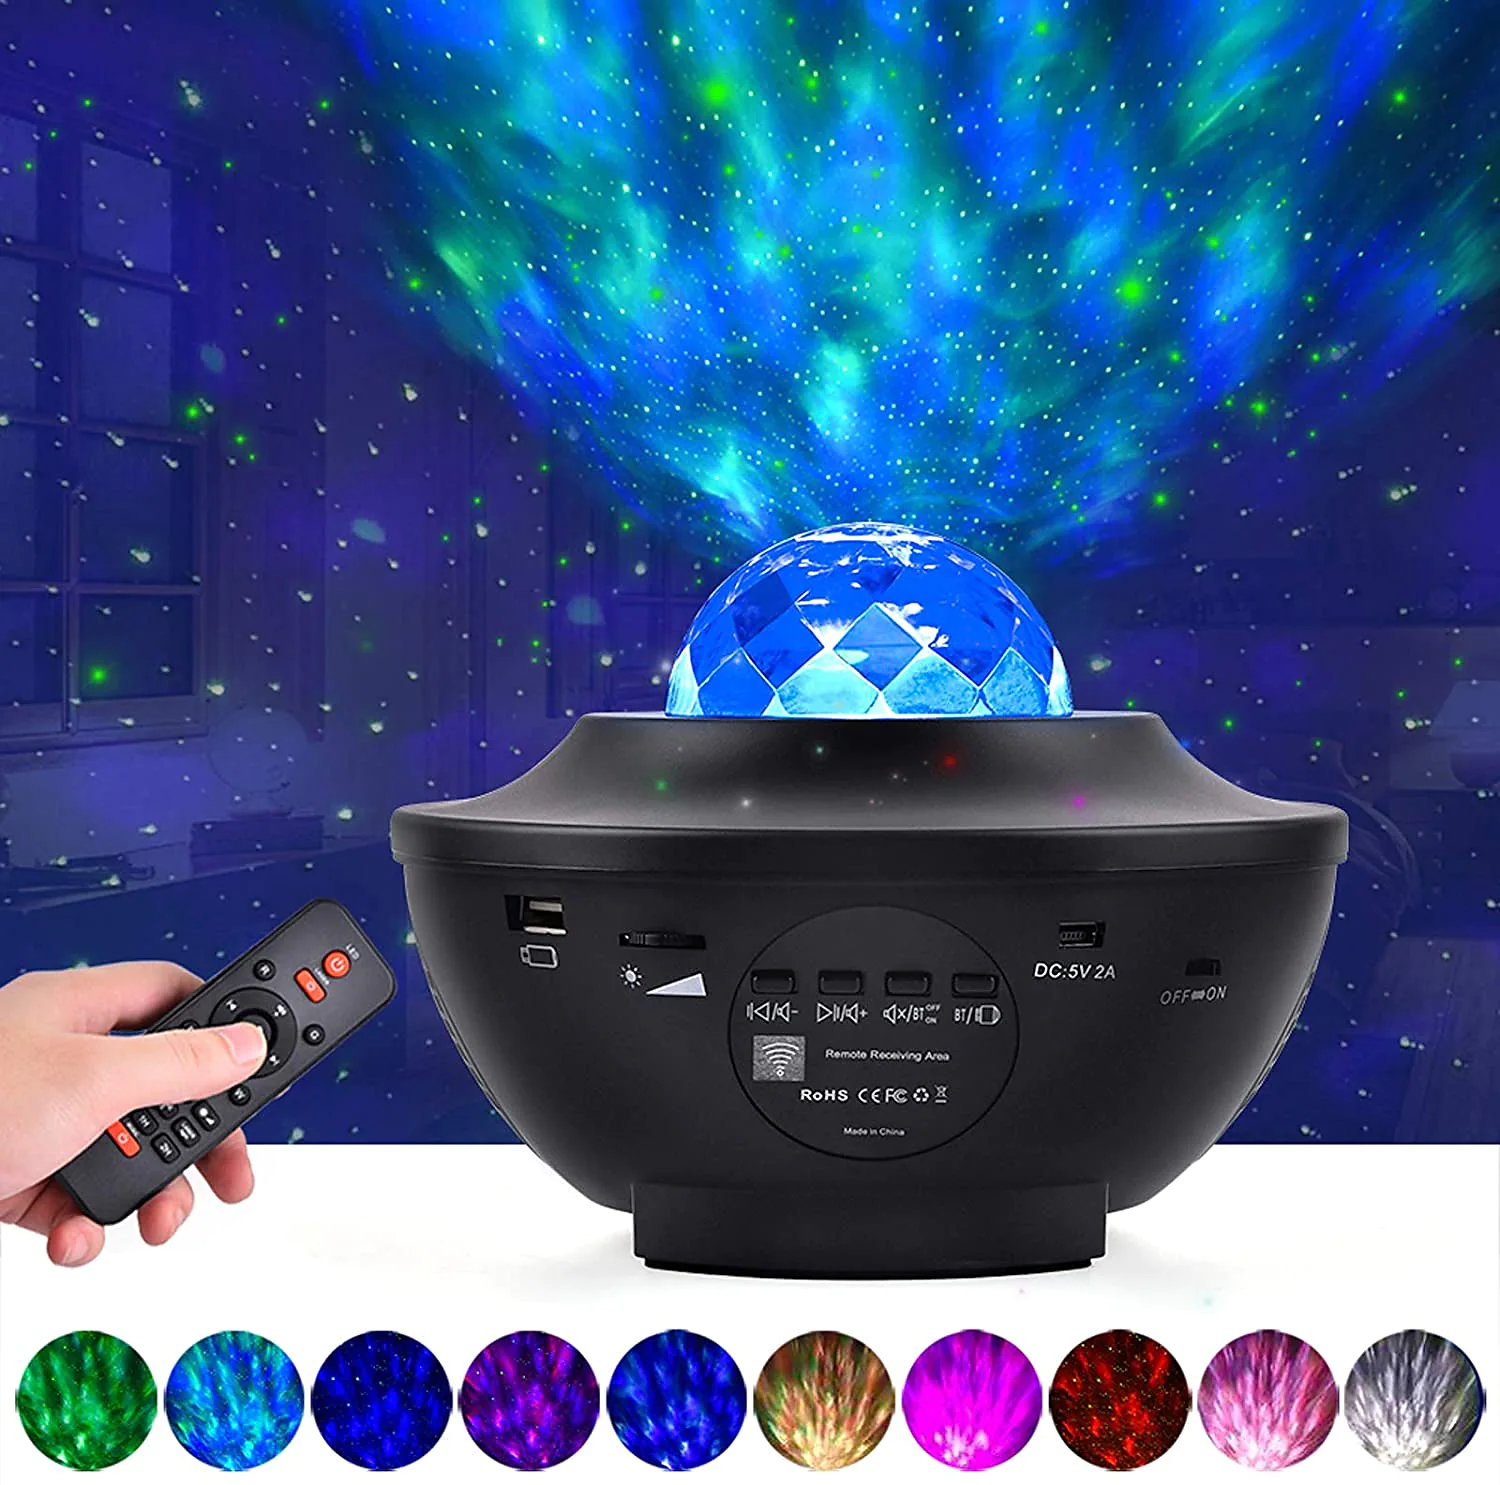 Music Star Projector Star Light Christmas Gift Nebula Projector Bluetooth Speaker Remote Control